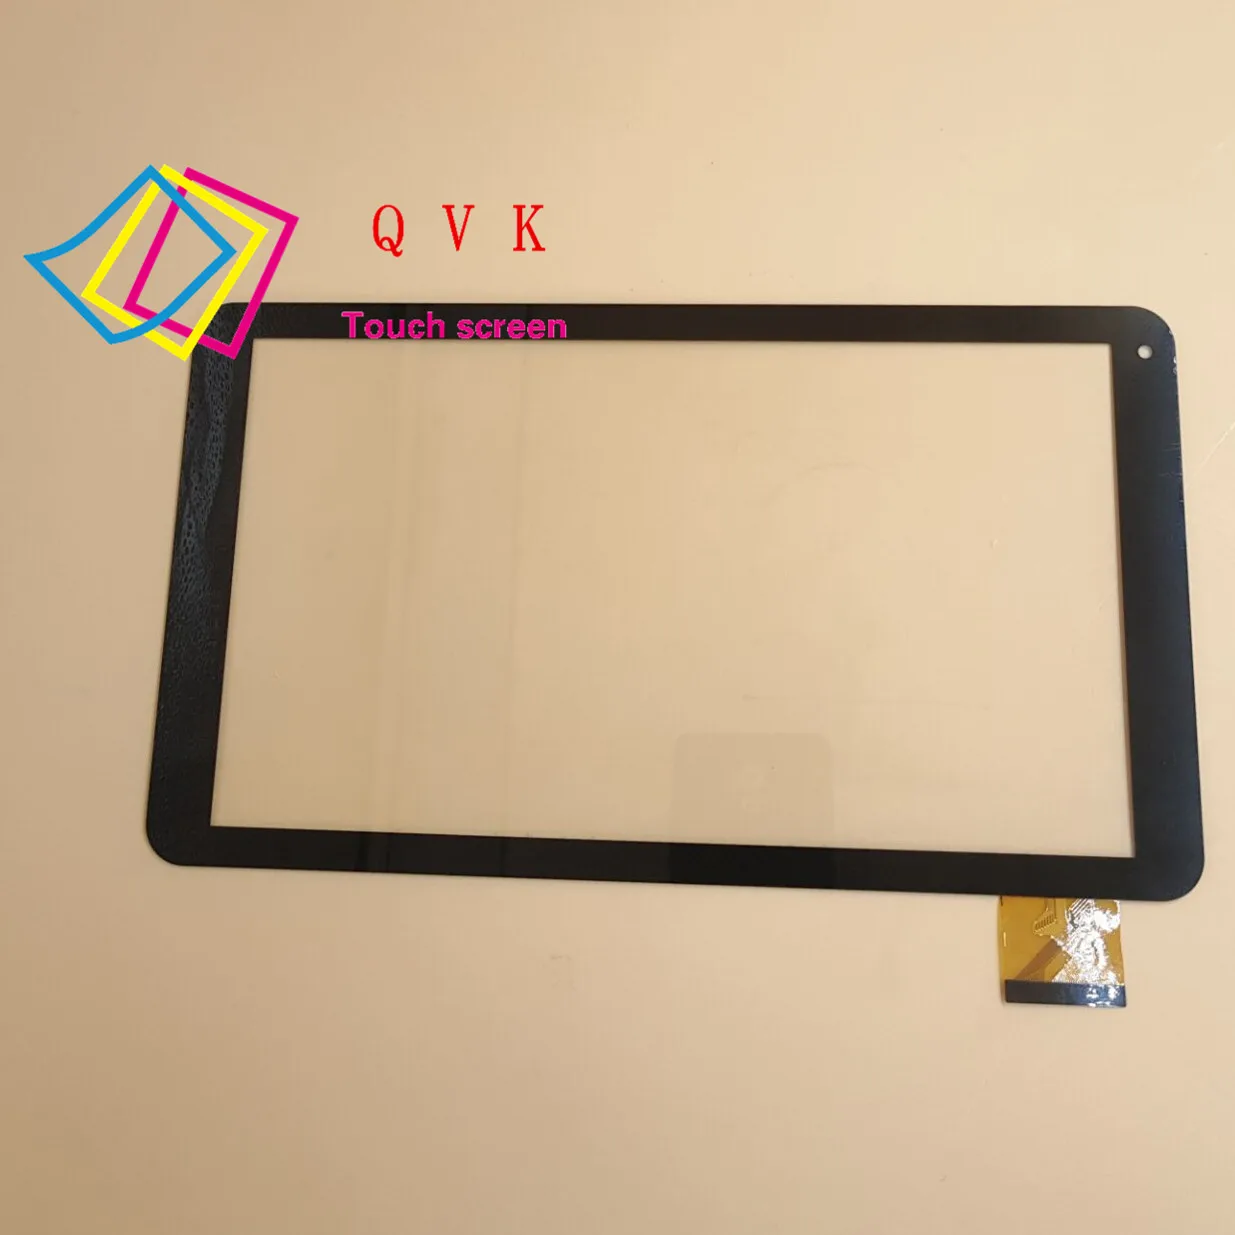 Discount Capacitance-Screen Tablet-Touch WOXTER QX for 105/qx105 Outside Uk101016g-01 fpc/V0.1/Zhc-0364b OLN9J8Dl